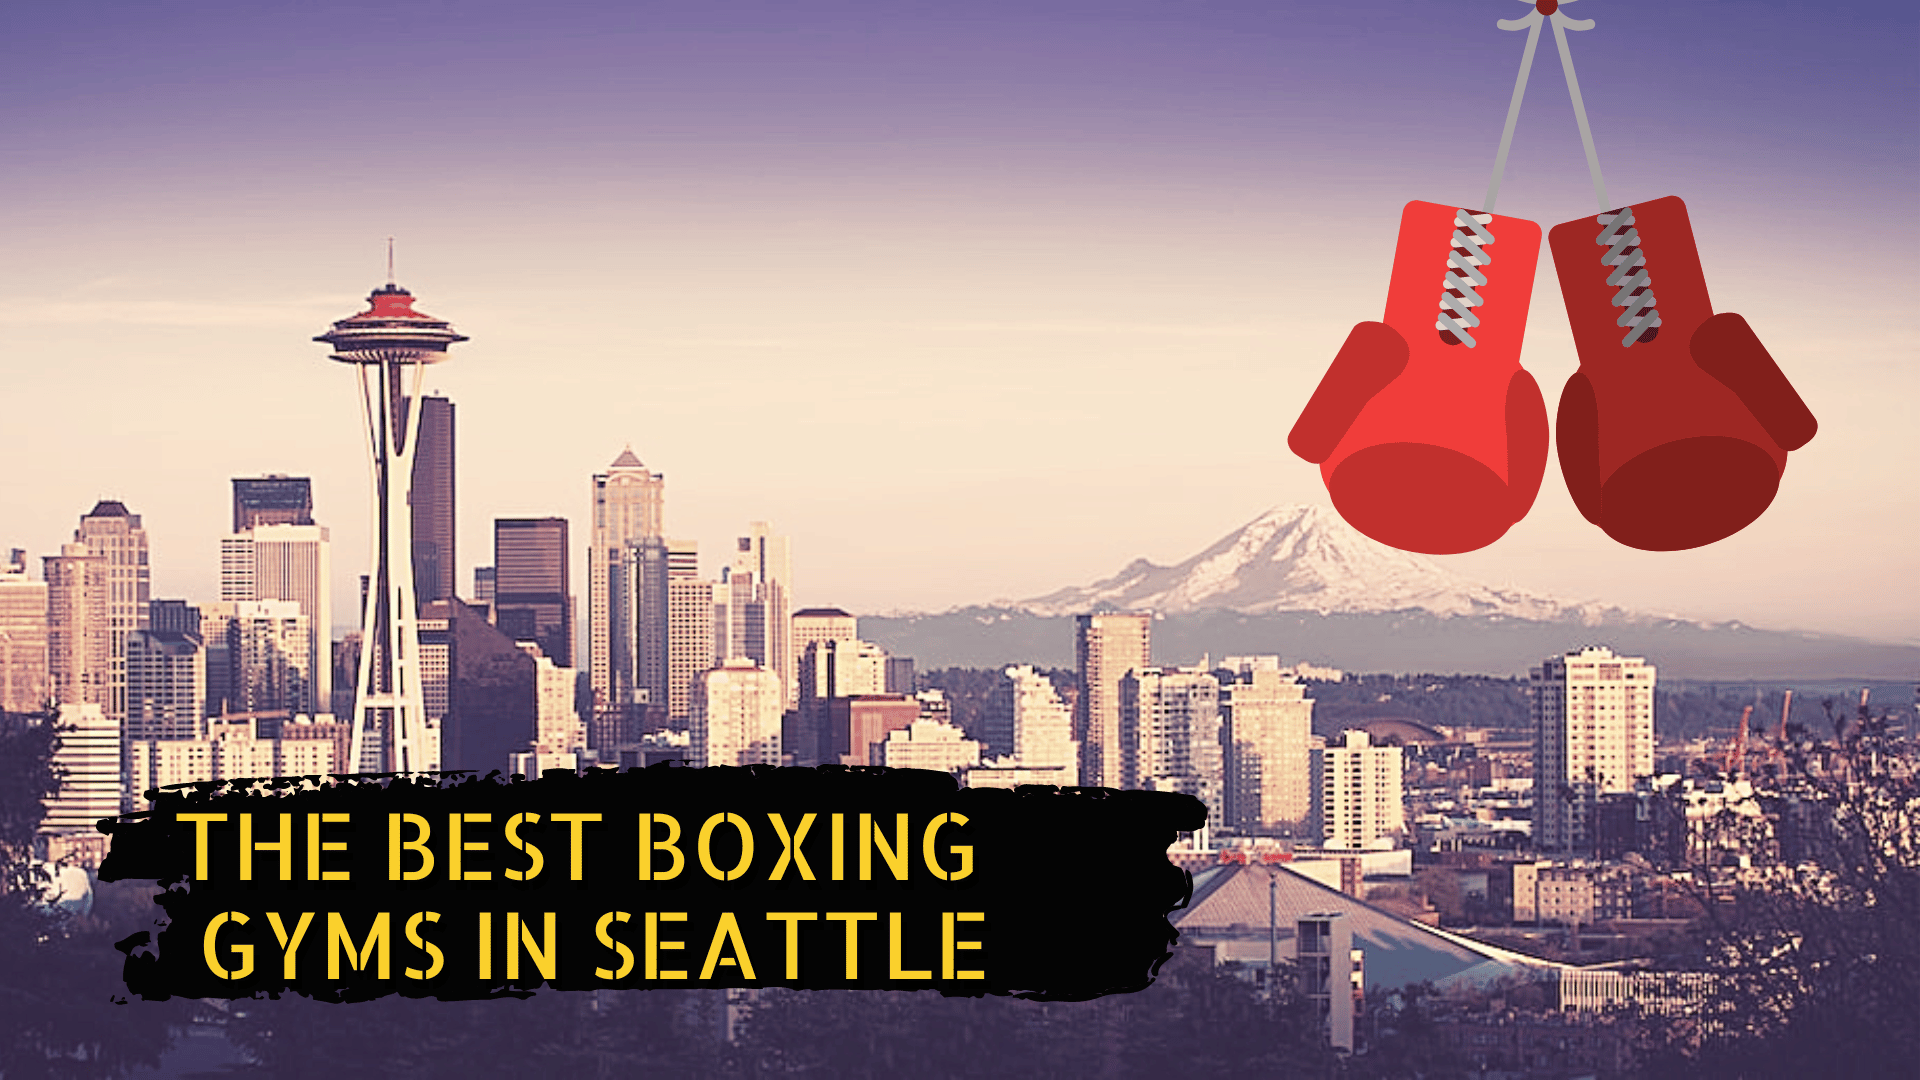 Seattle sky line and some boxing gloves with the title "best boxing gyms in Seattle"